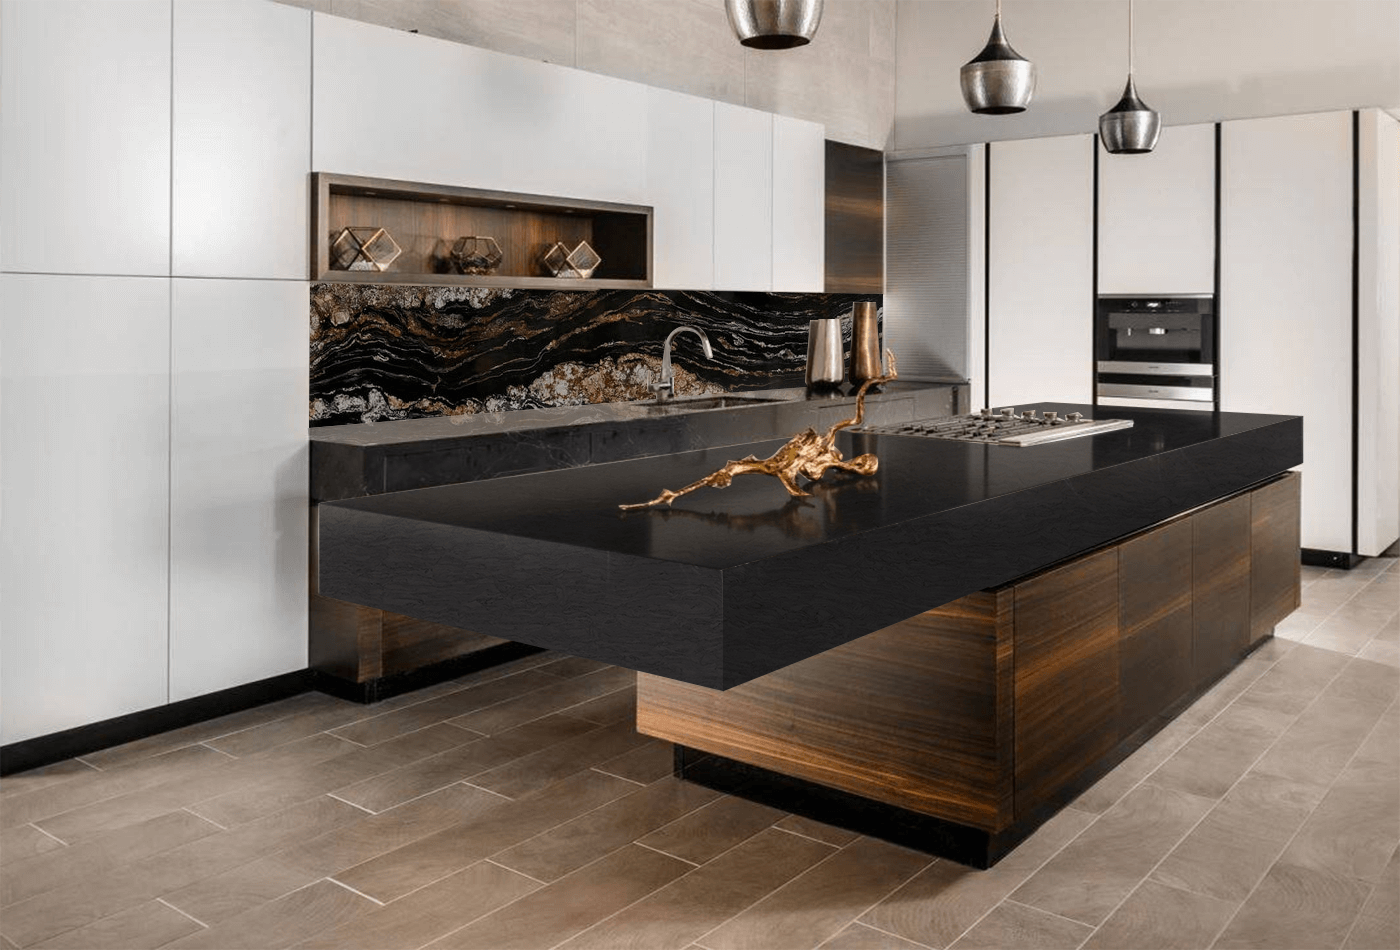 Black and Gold Kitchen is a Fantastic Combination, Try This